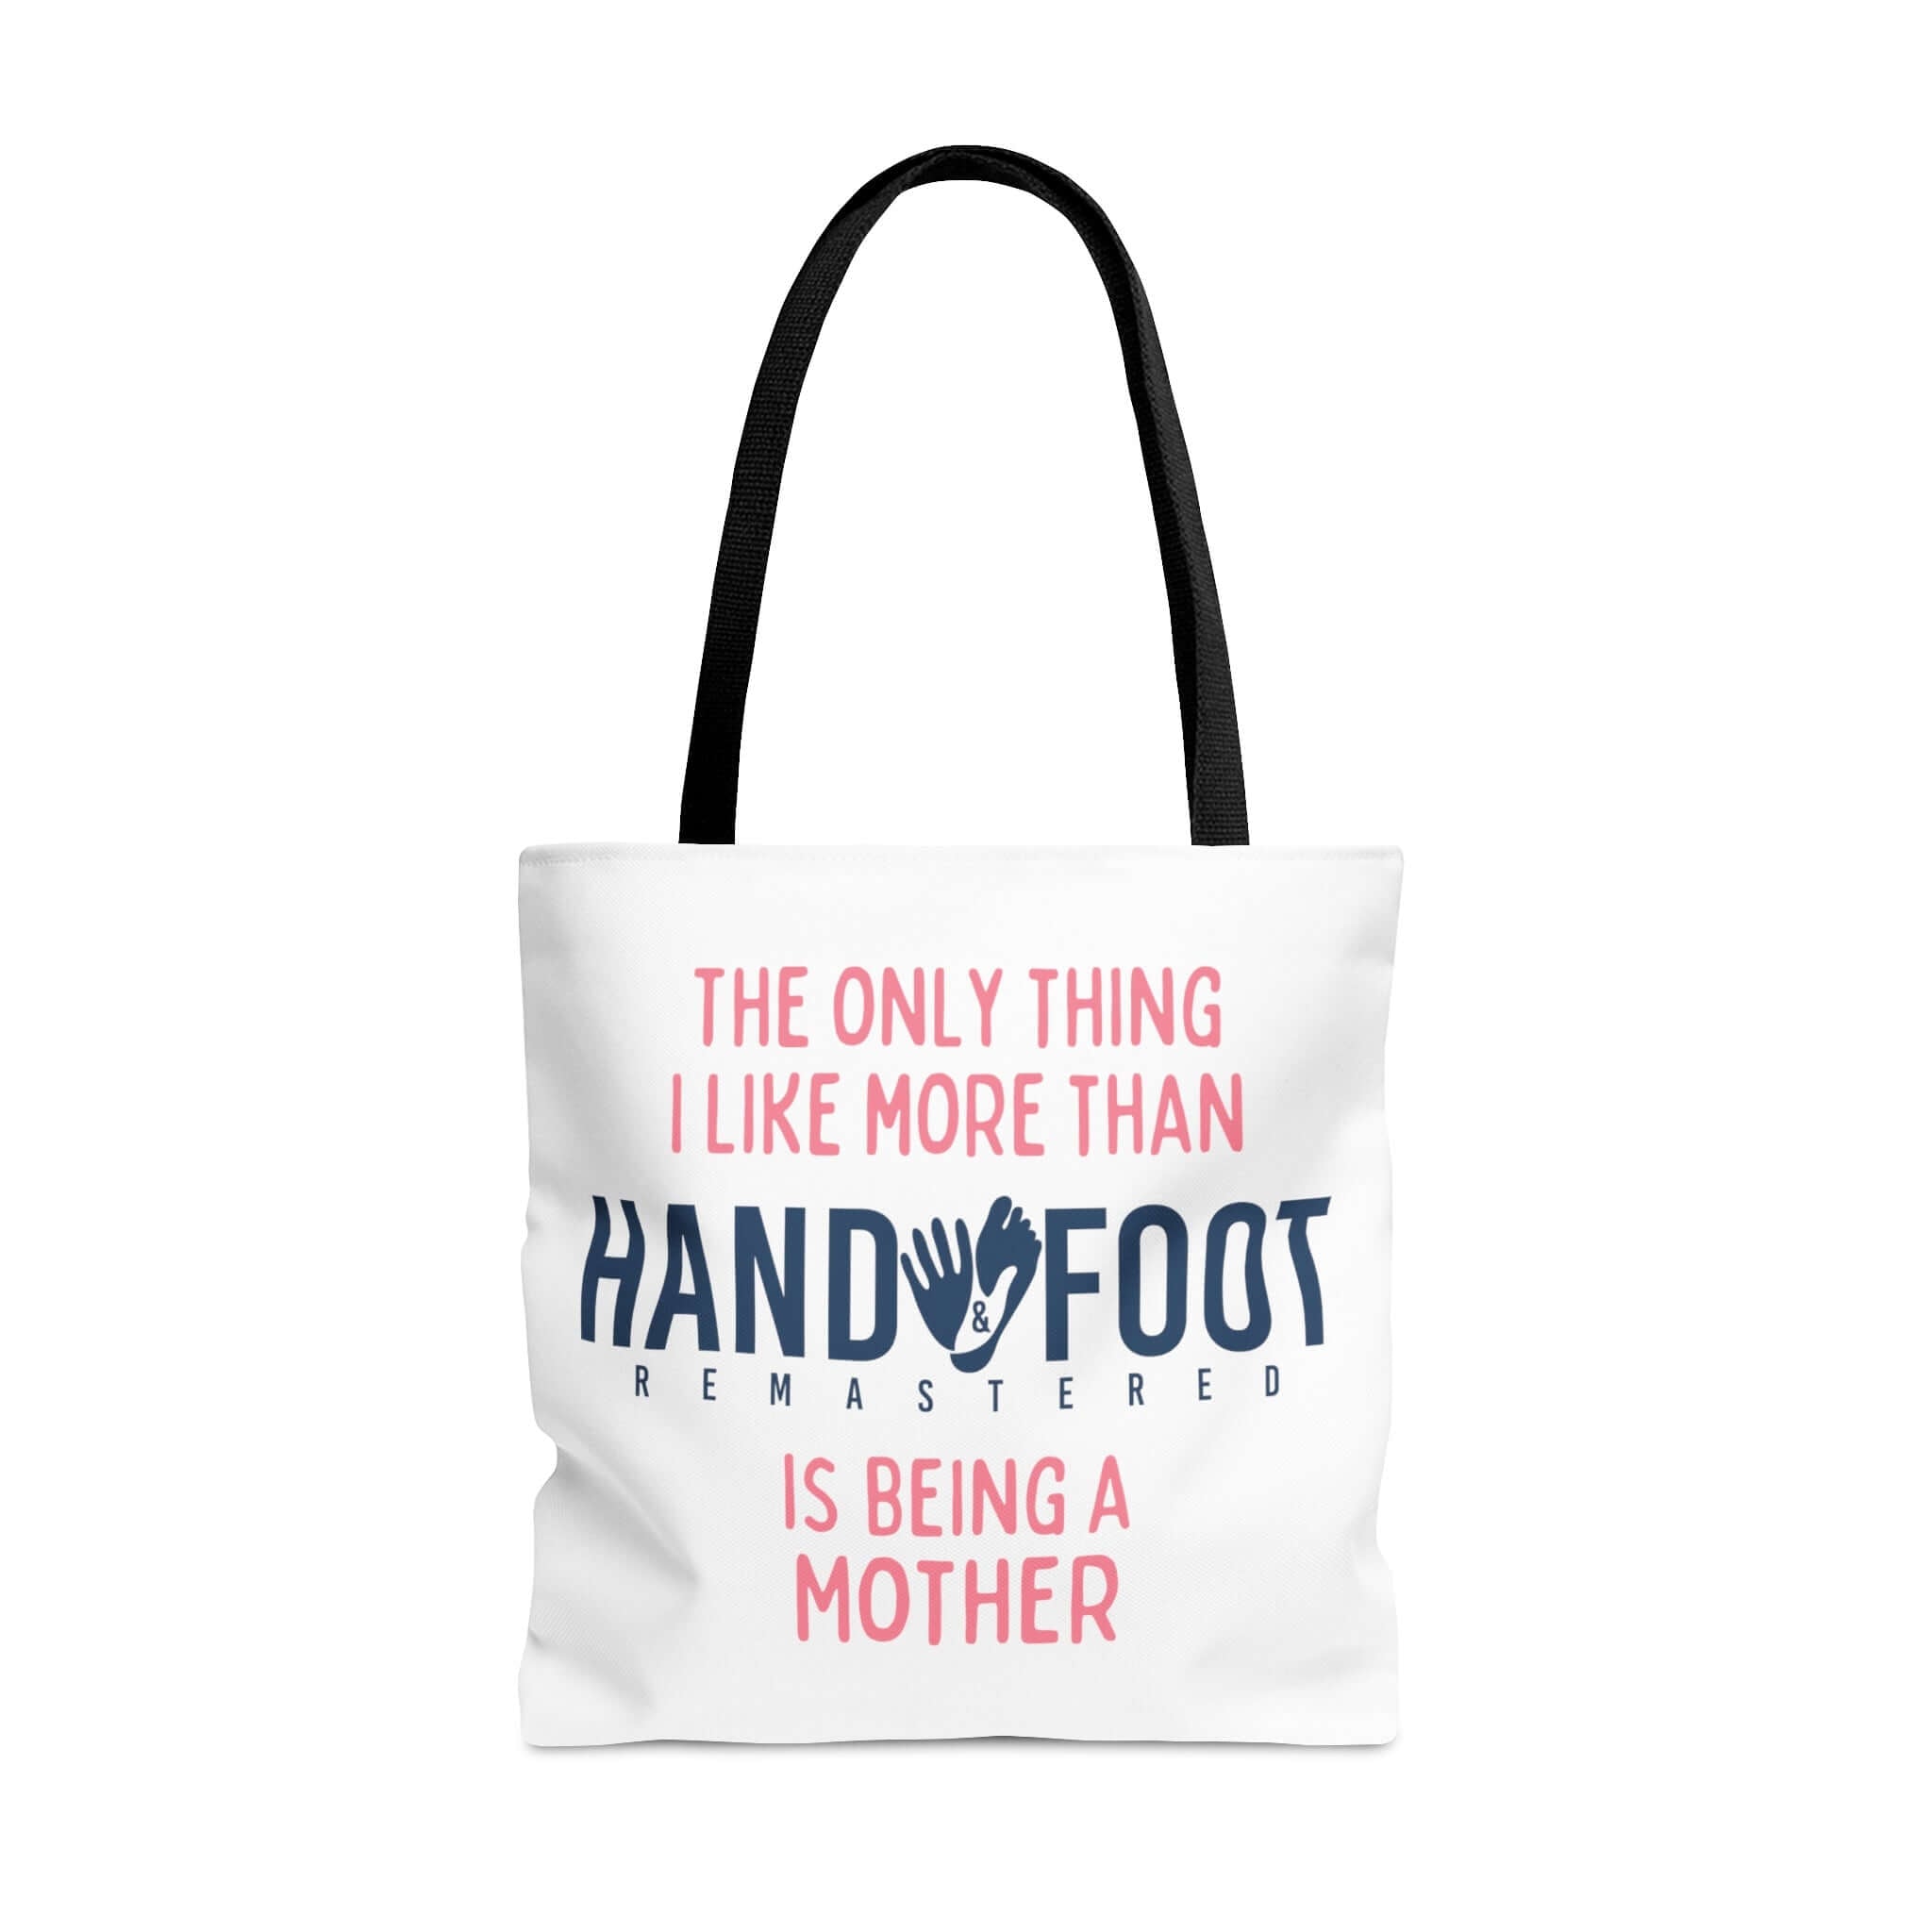 Being a Mother Hand & Foot Remastered Polyester Tote Bag - 2 Sizes